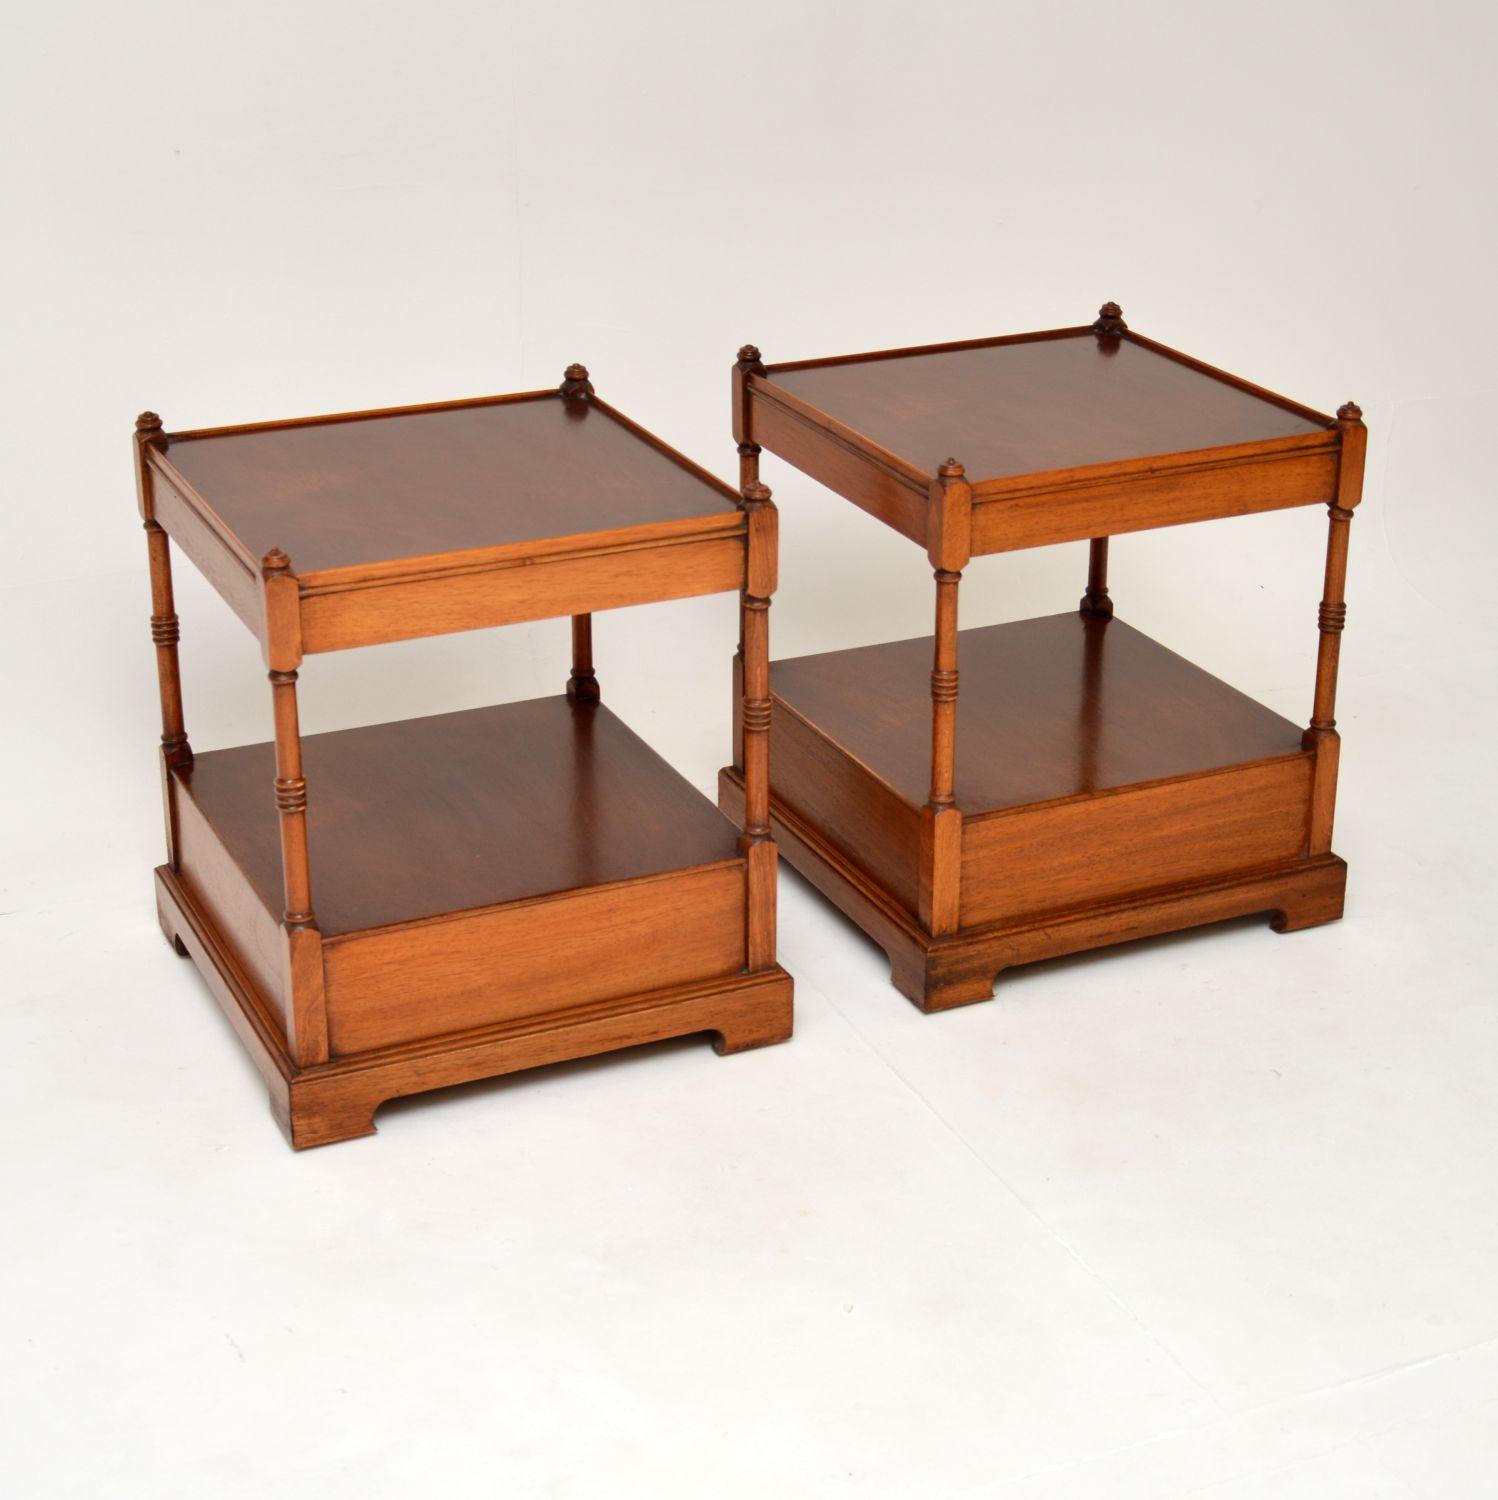 Mid-20th Century Pair of Antique Georgian Style Side Tables